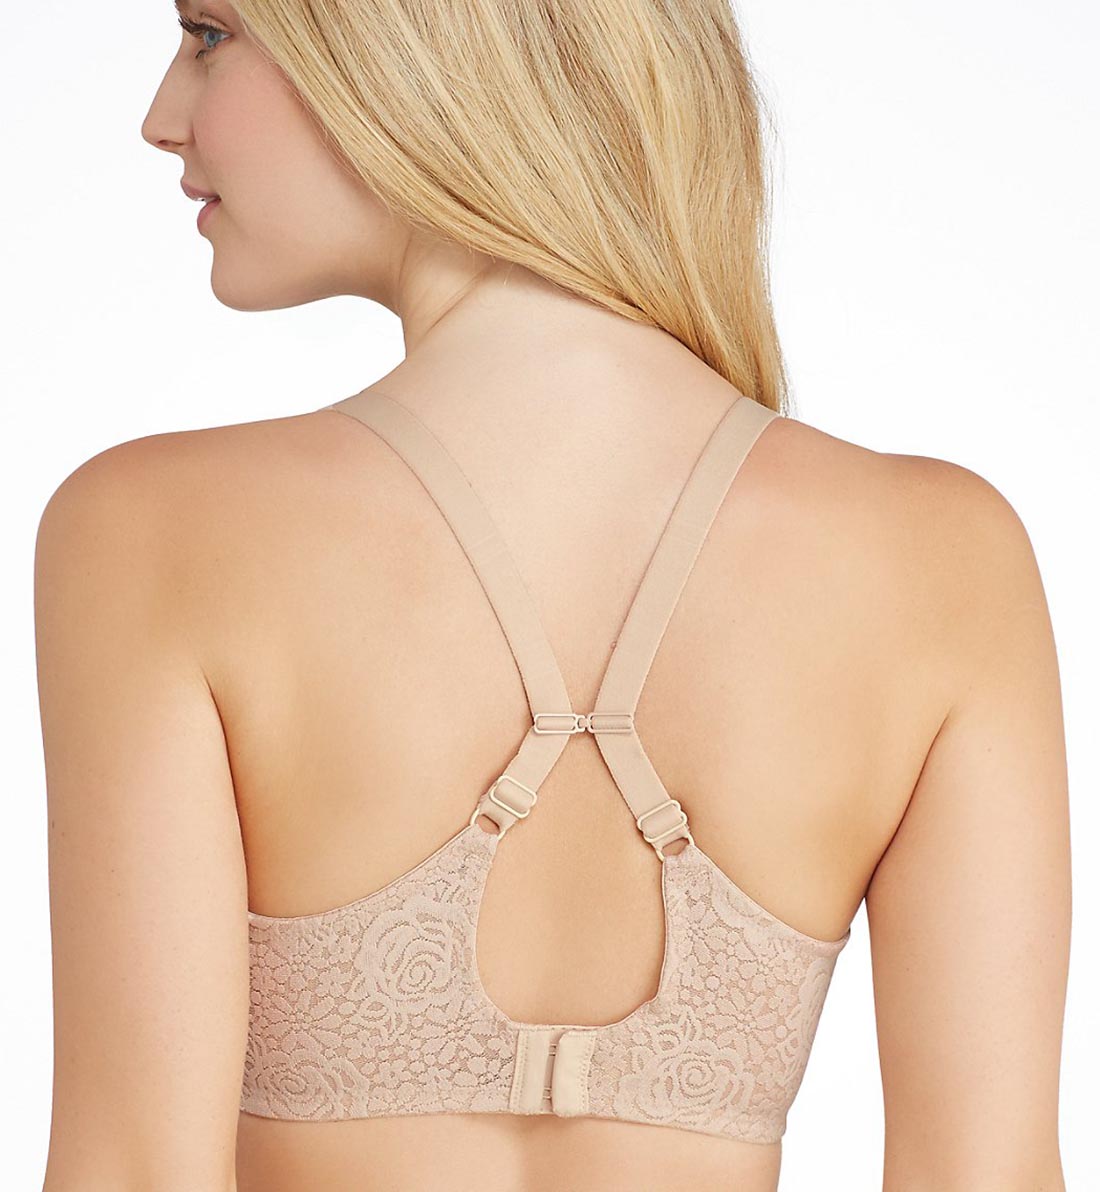 Wacoal Halo Lace Seamless Underwire J-Hook Bra (851205),36D,Natural Nude - Natural Nude,36D